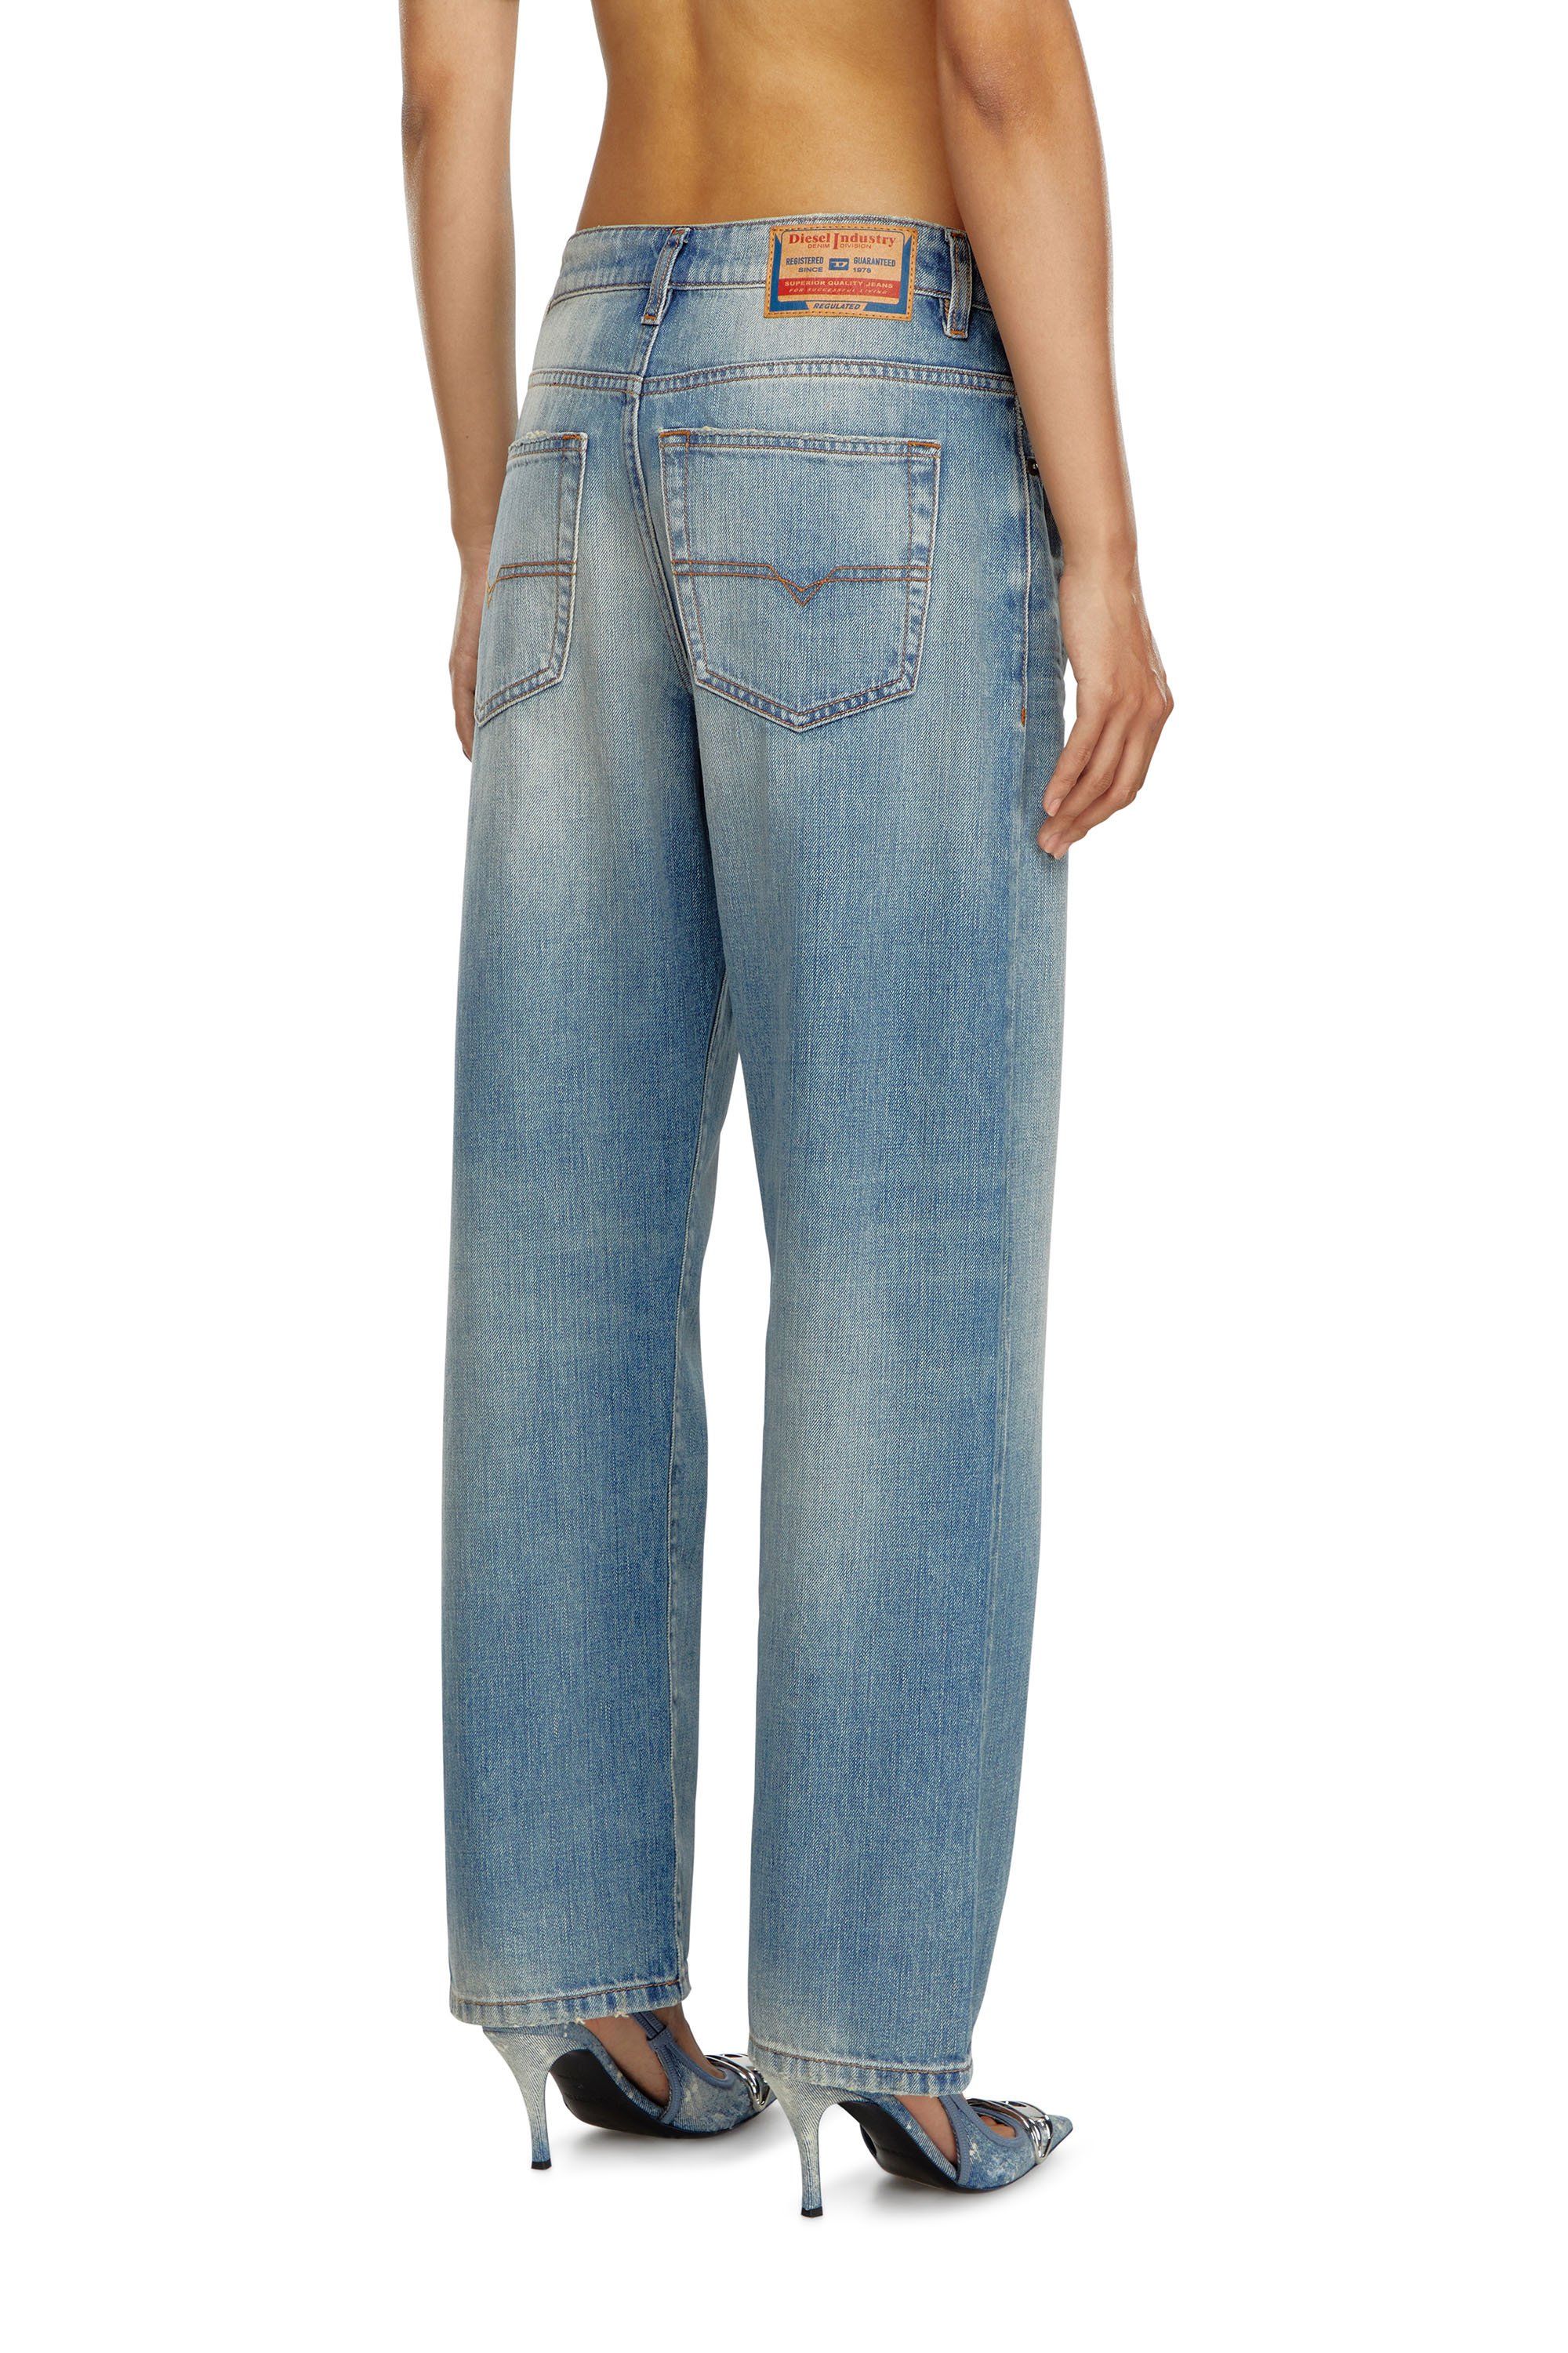 Diesel - Straight Jeans 1999 D-Reggy 0GRDN, Mujer Straight Jeans - 1999 D-Reggy in Azul marino - Image 3